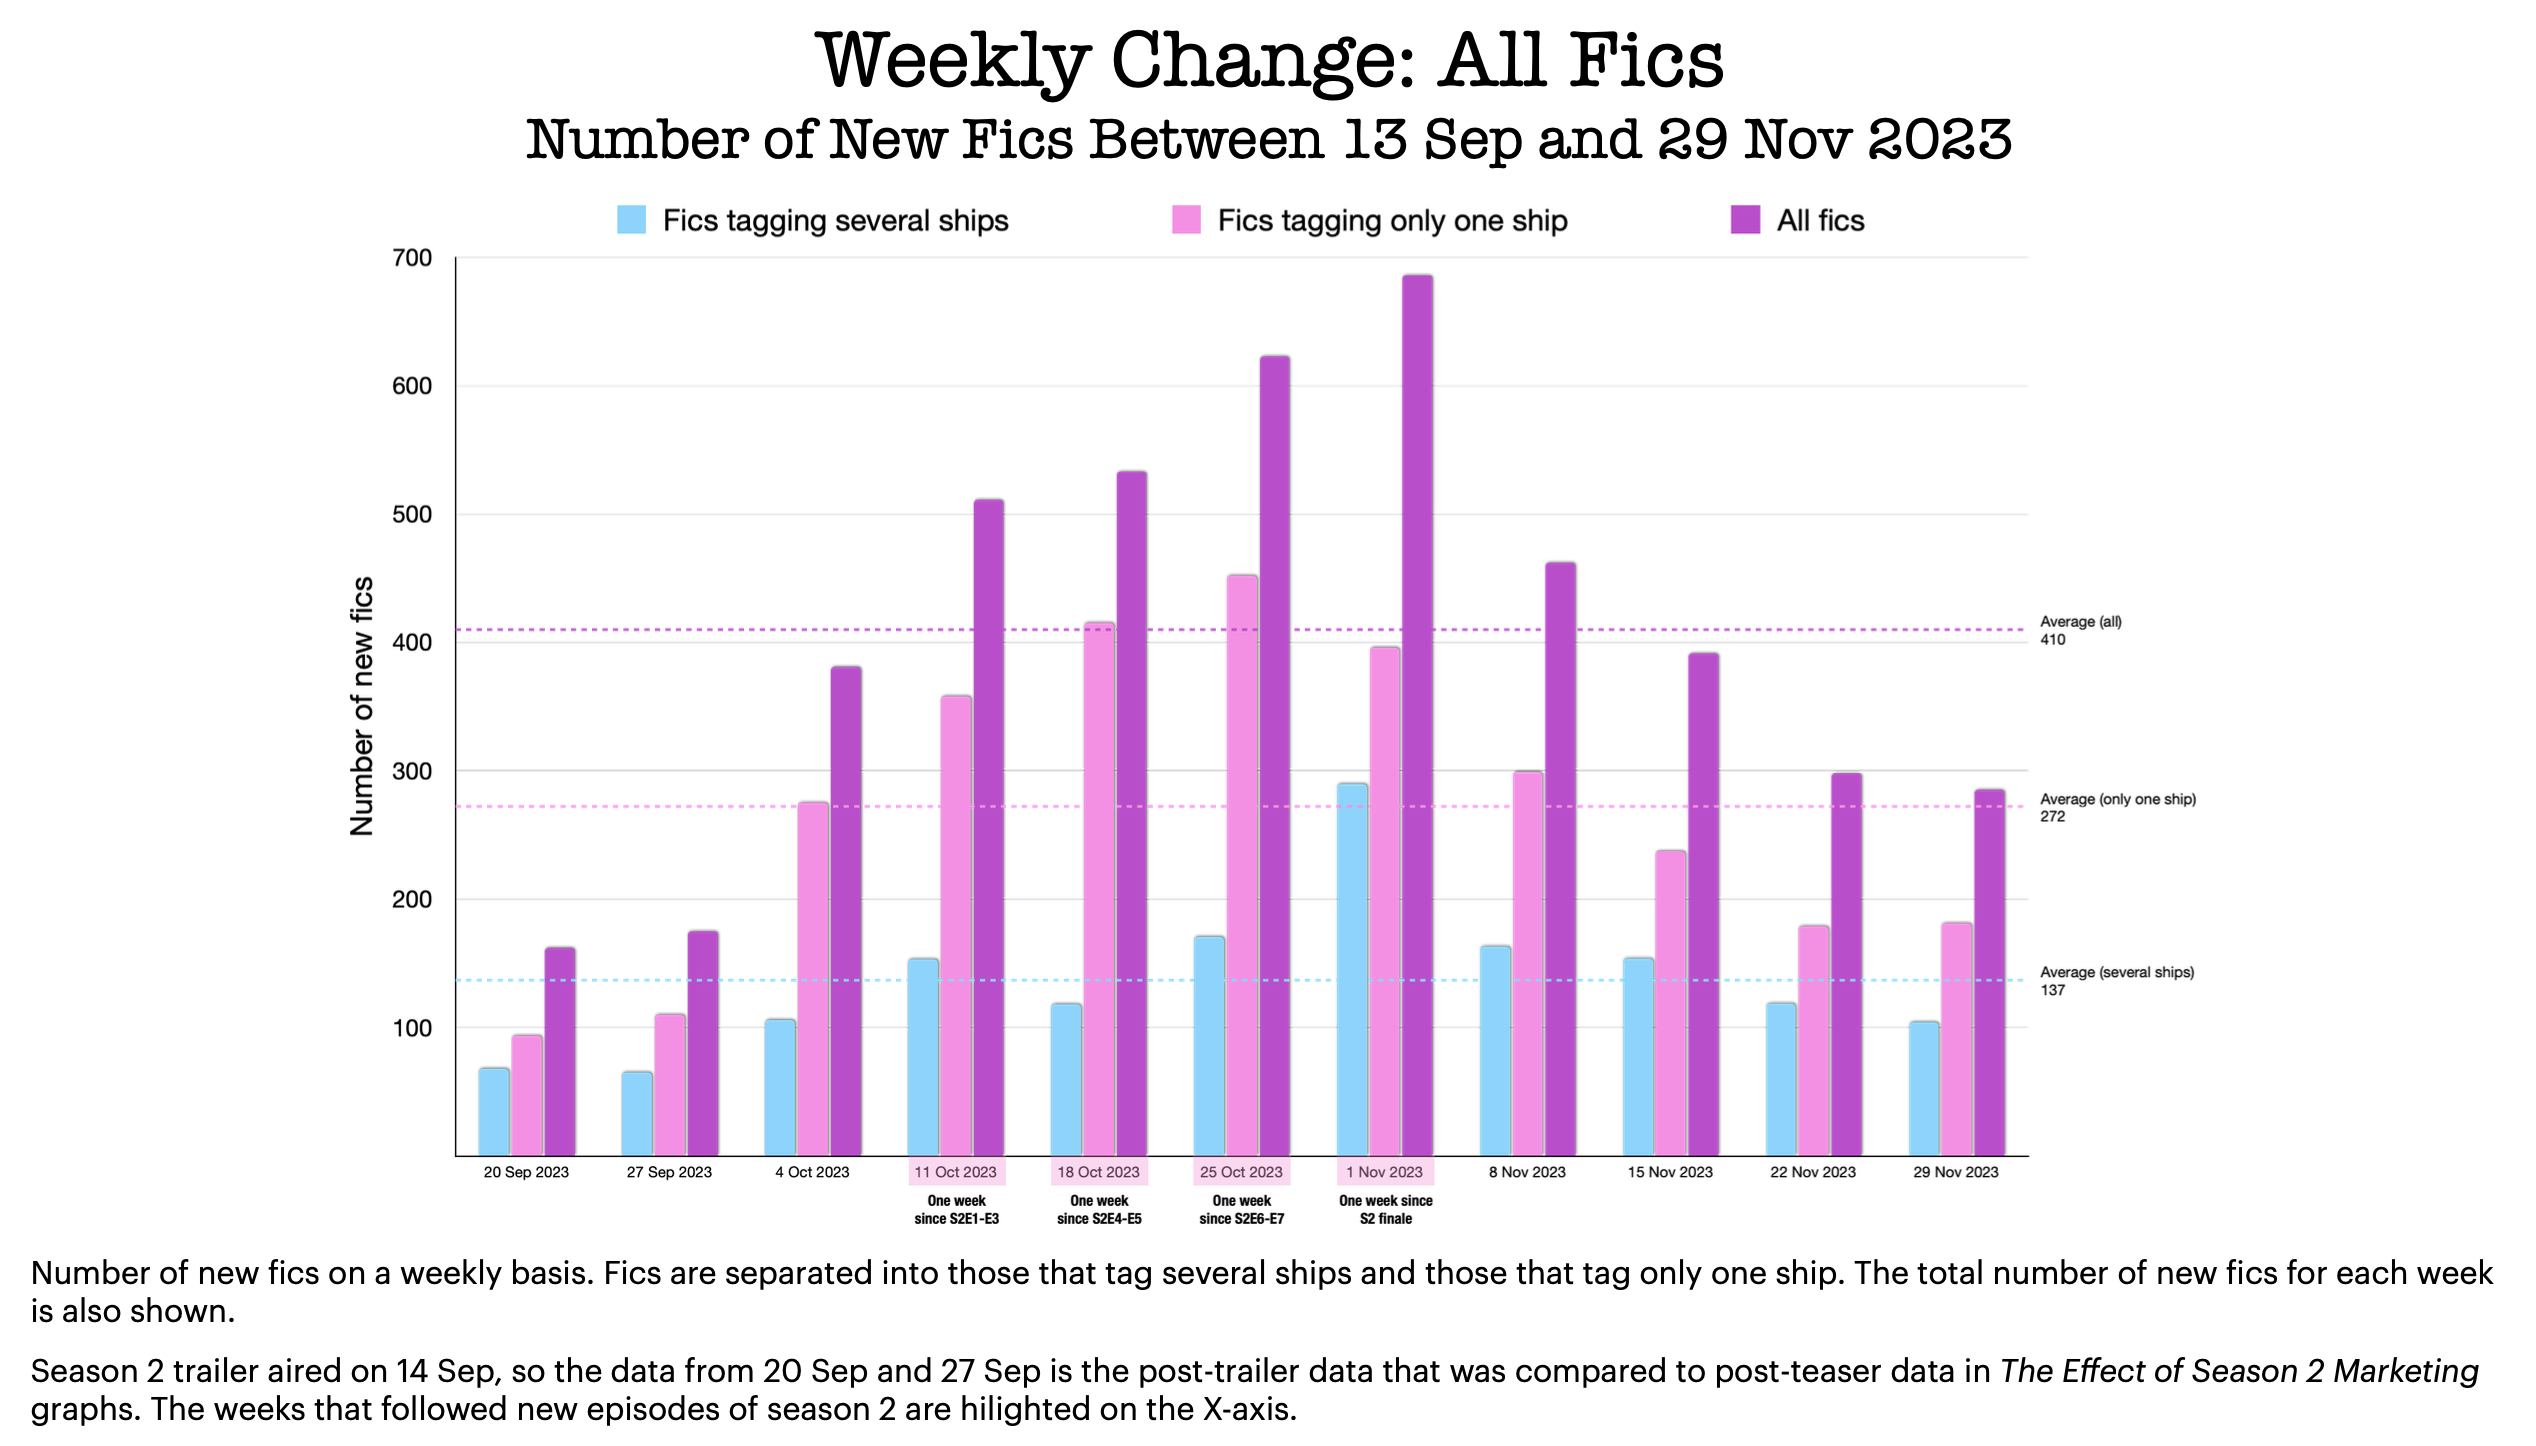 A bar chart showing the weekly numbers of new fanfics before, during and after OFMD season 2.